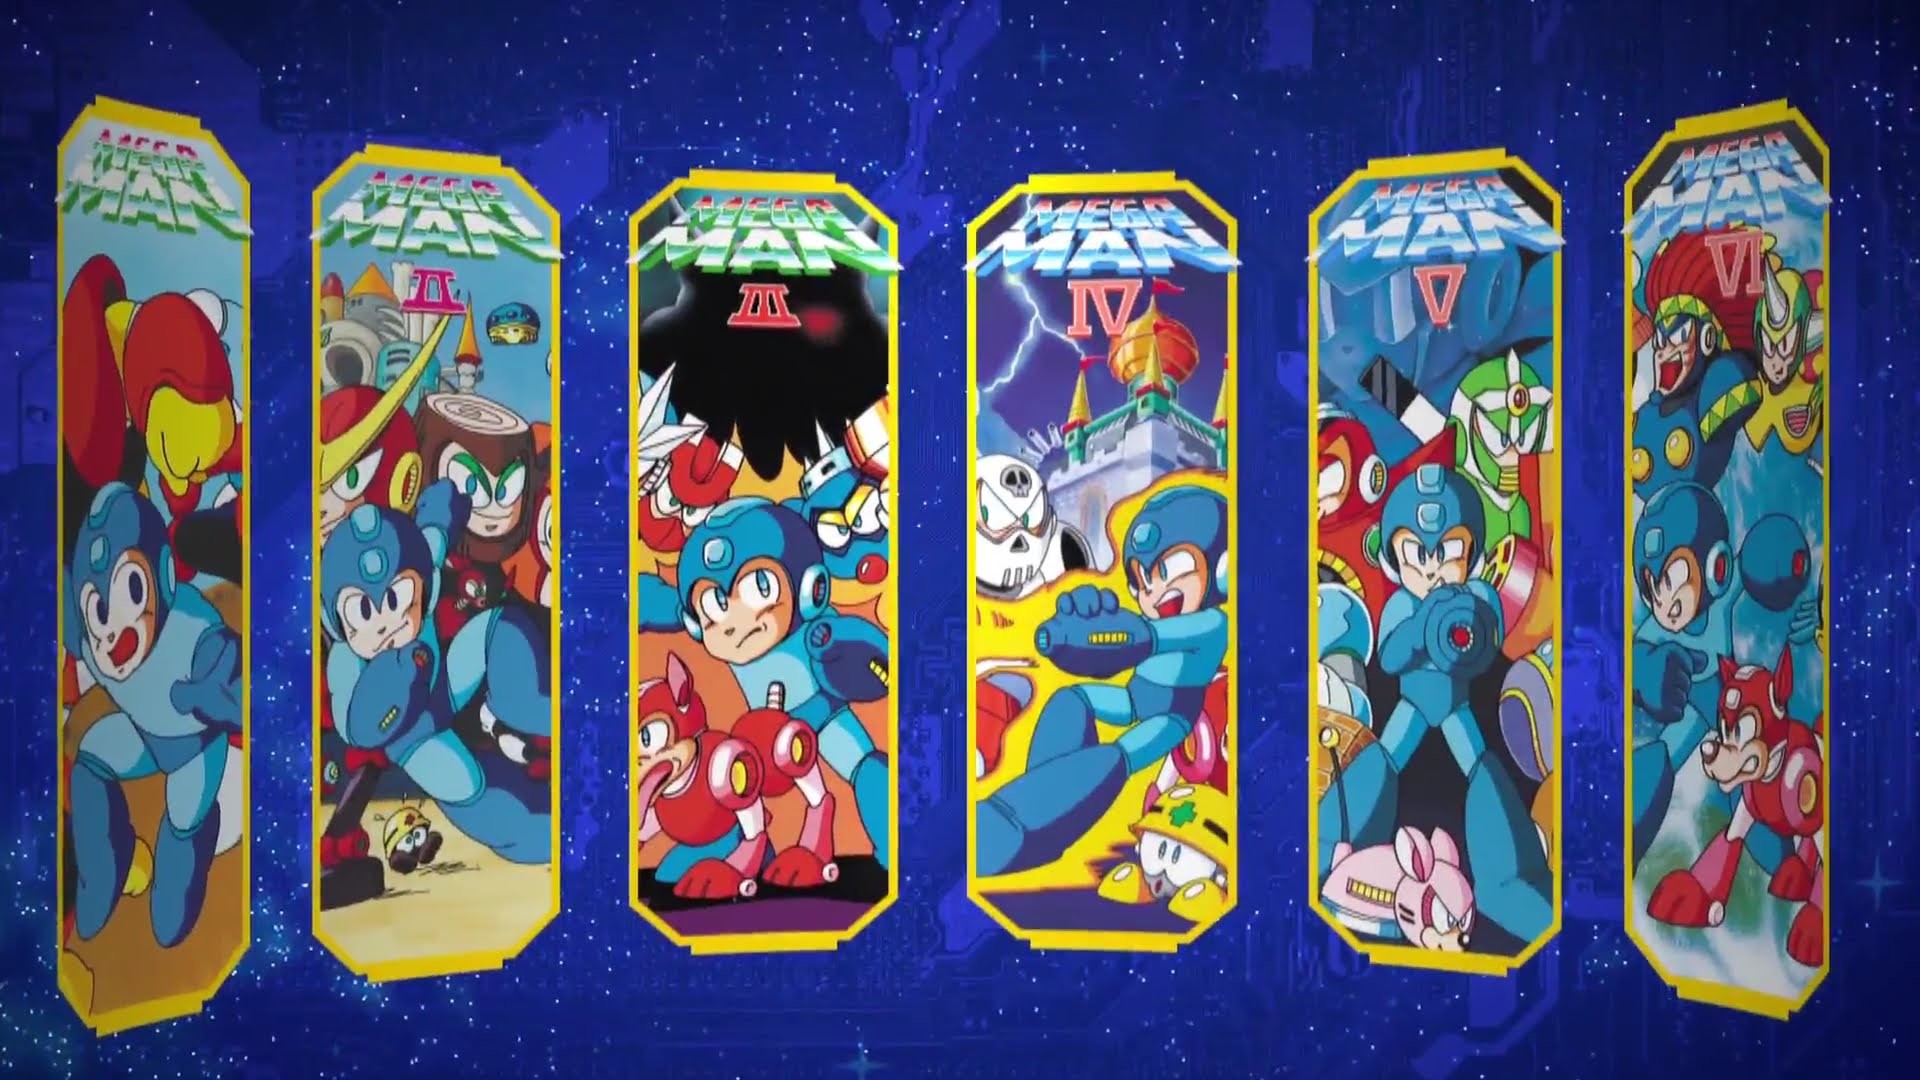 1920x1080 View, download, comment, and rate this  Mega Man Legacy Collection  Wallpaper -